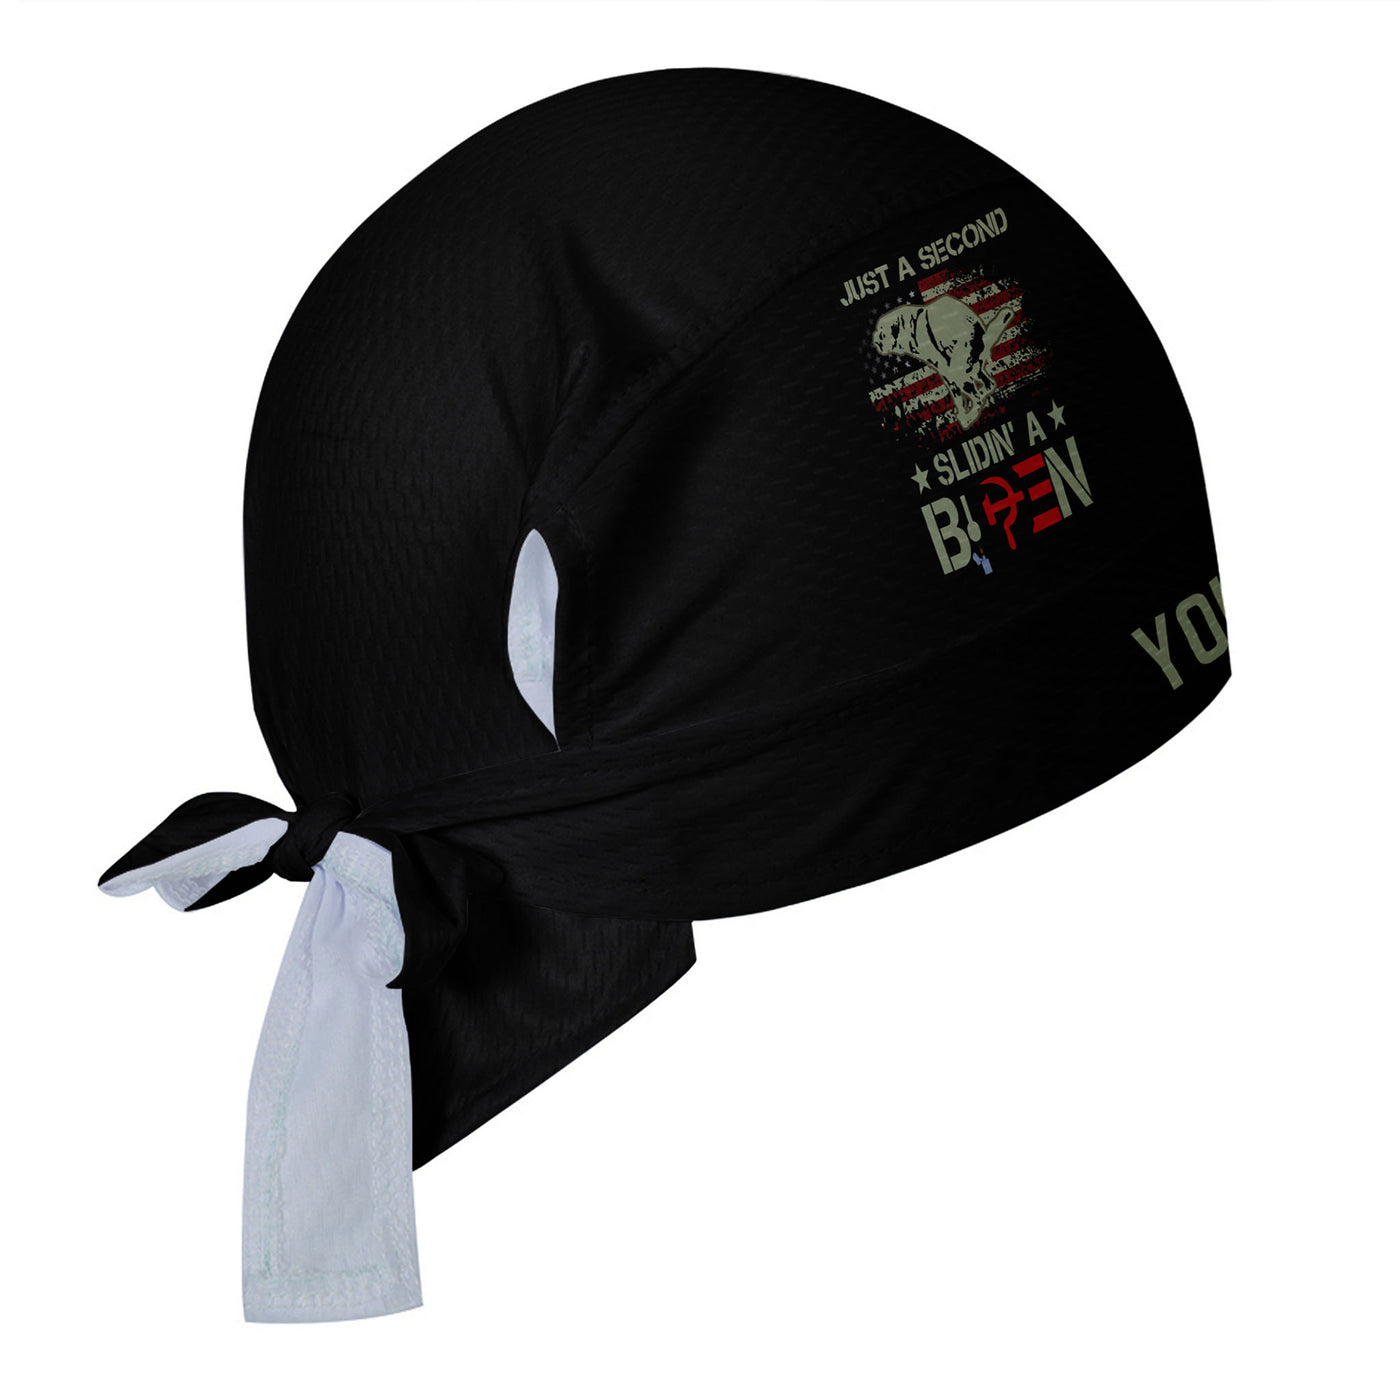 Customized Just A Second Slidin' A Biden Cycling Scarf Sports Hats